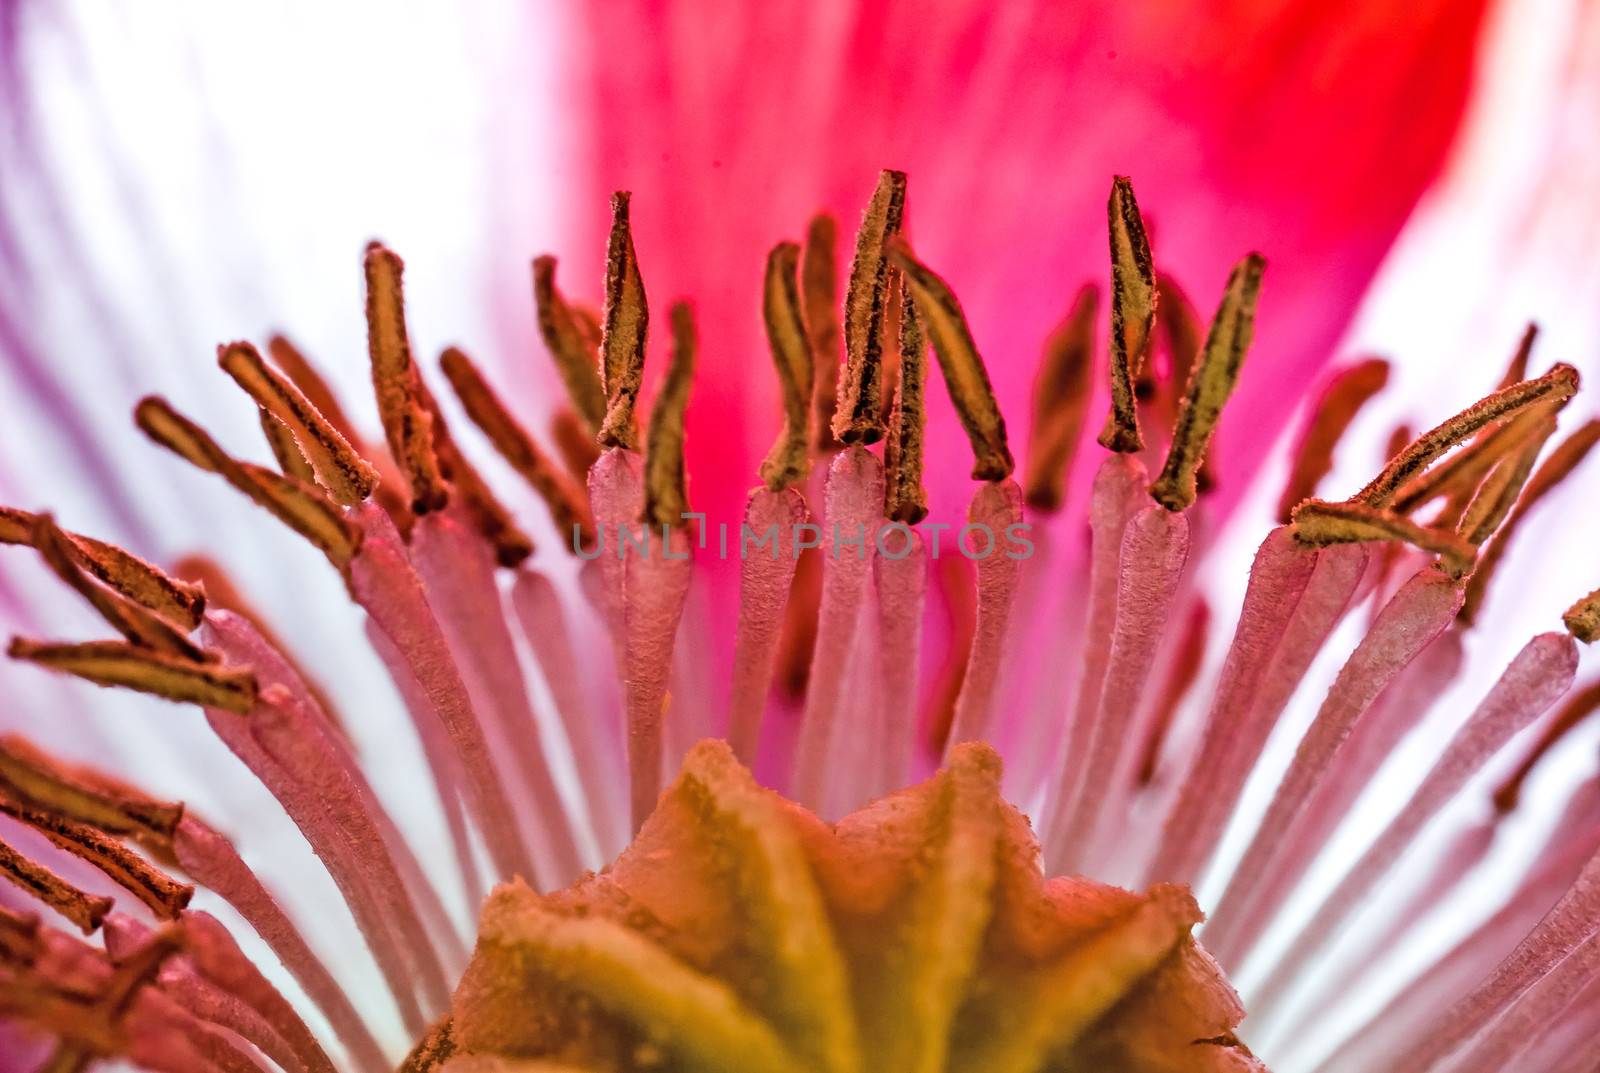 The heart of the Poppy flower, the seed capsule, surrounded by a plethora of stamens.